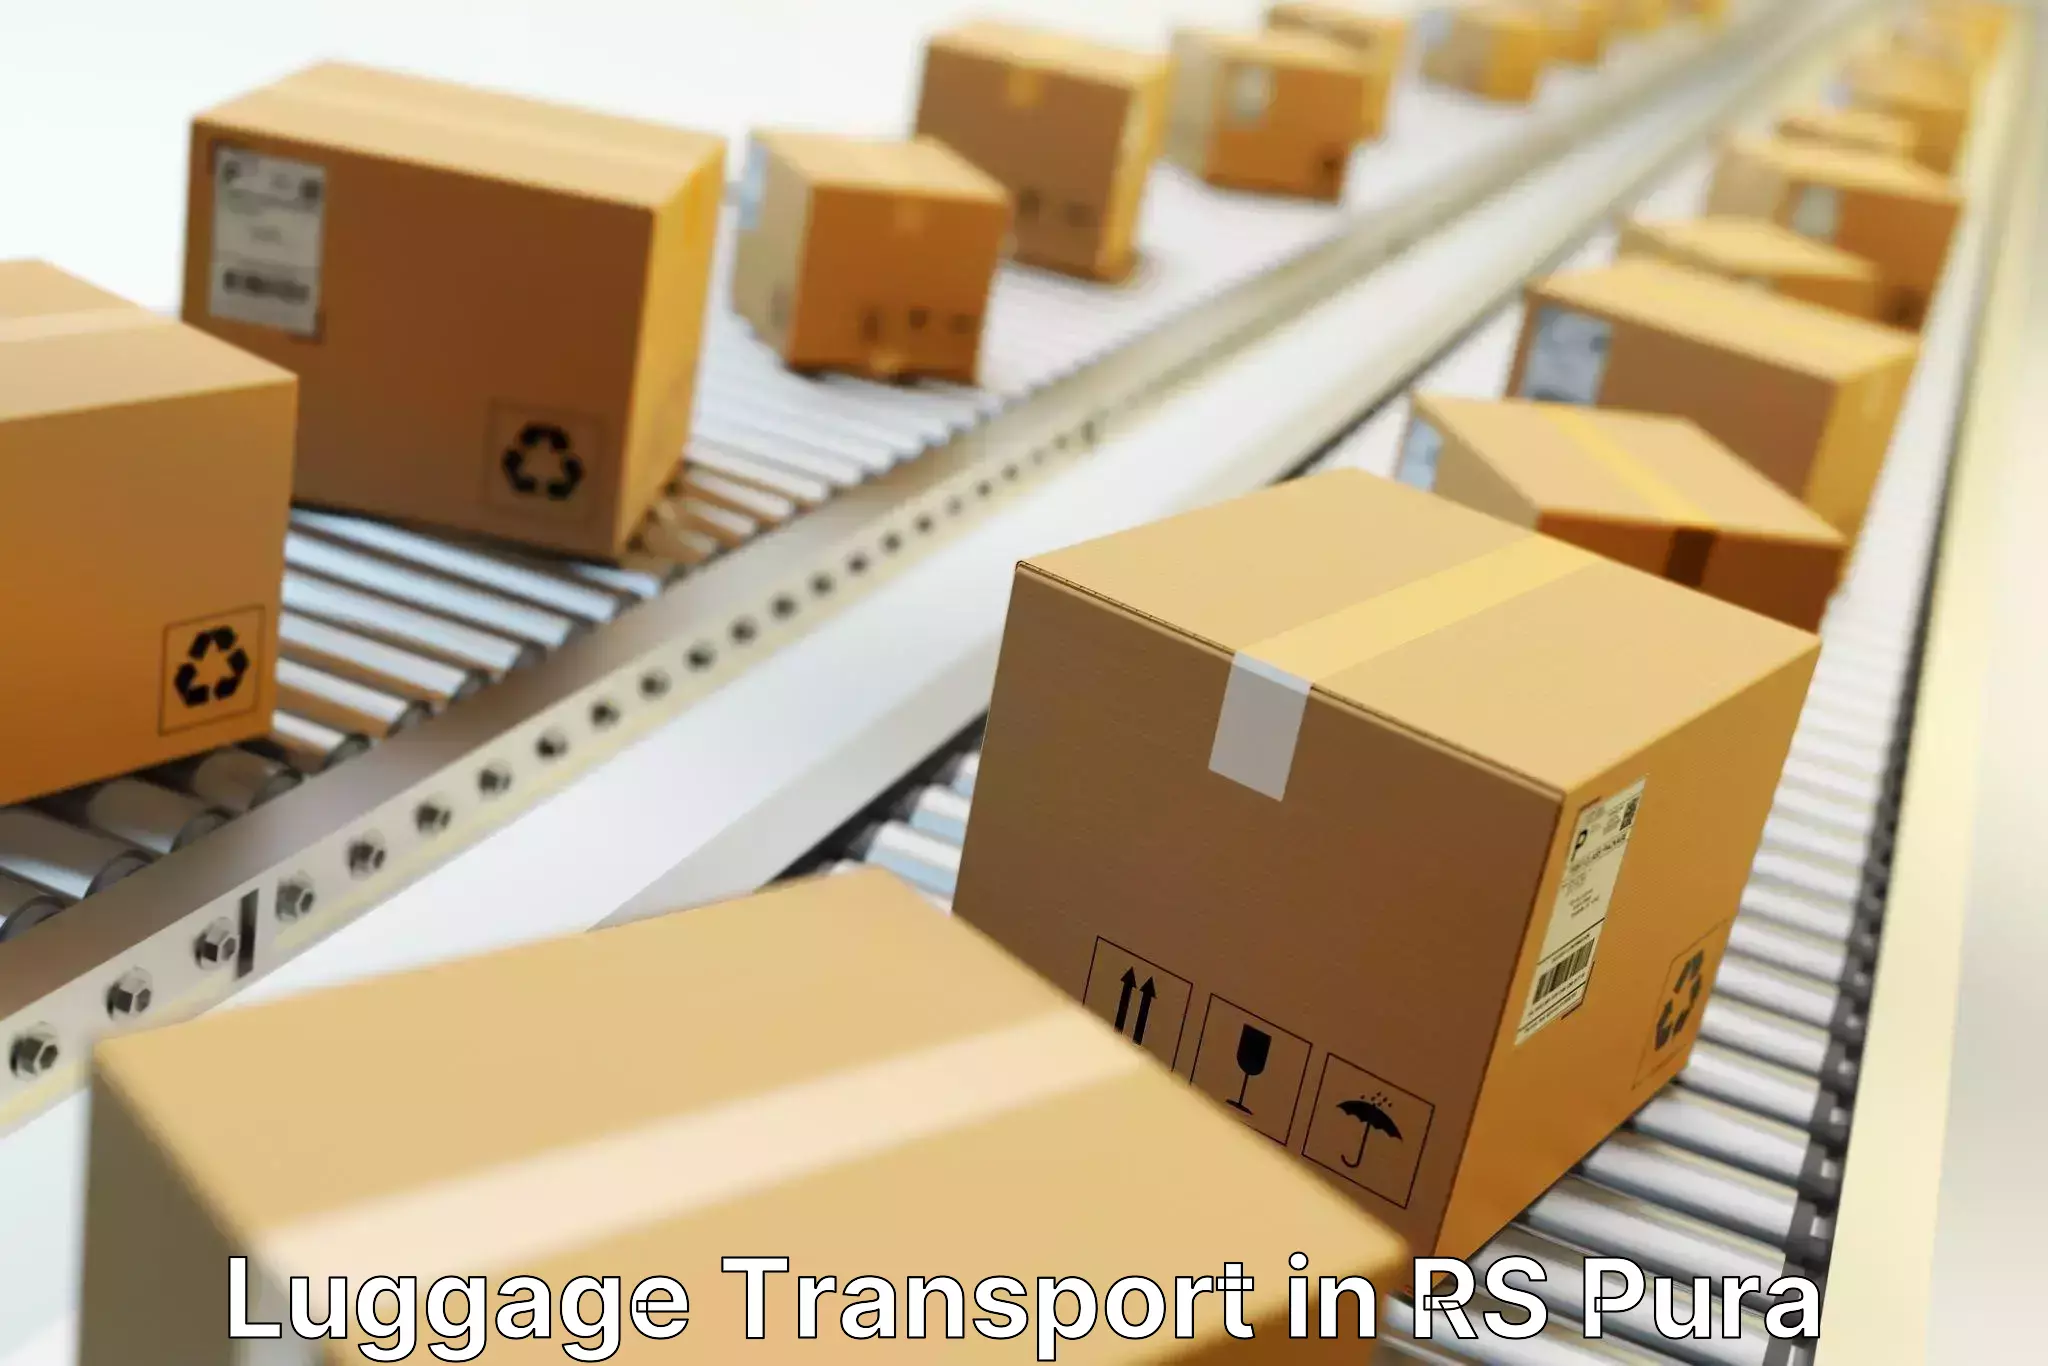 Luggage transport company in RS Pura